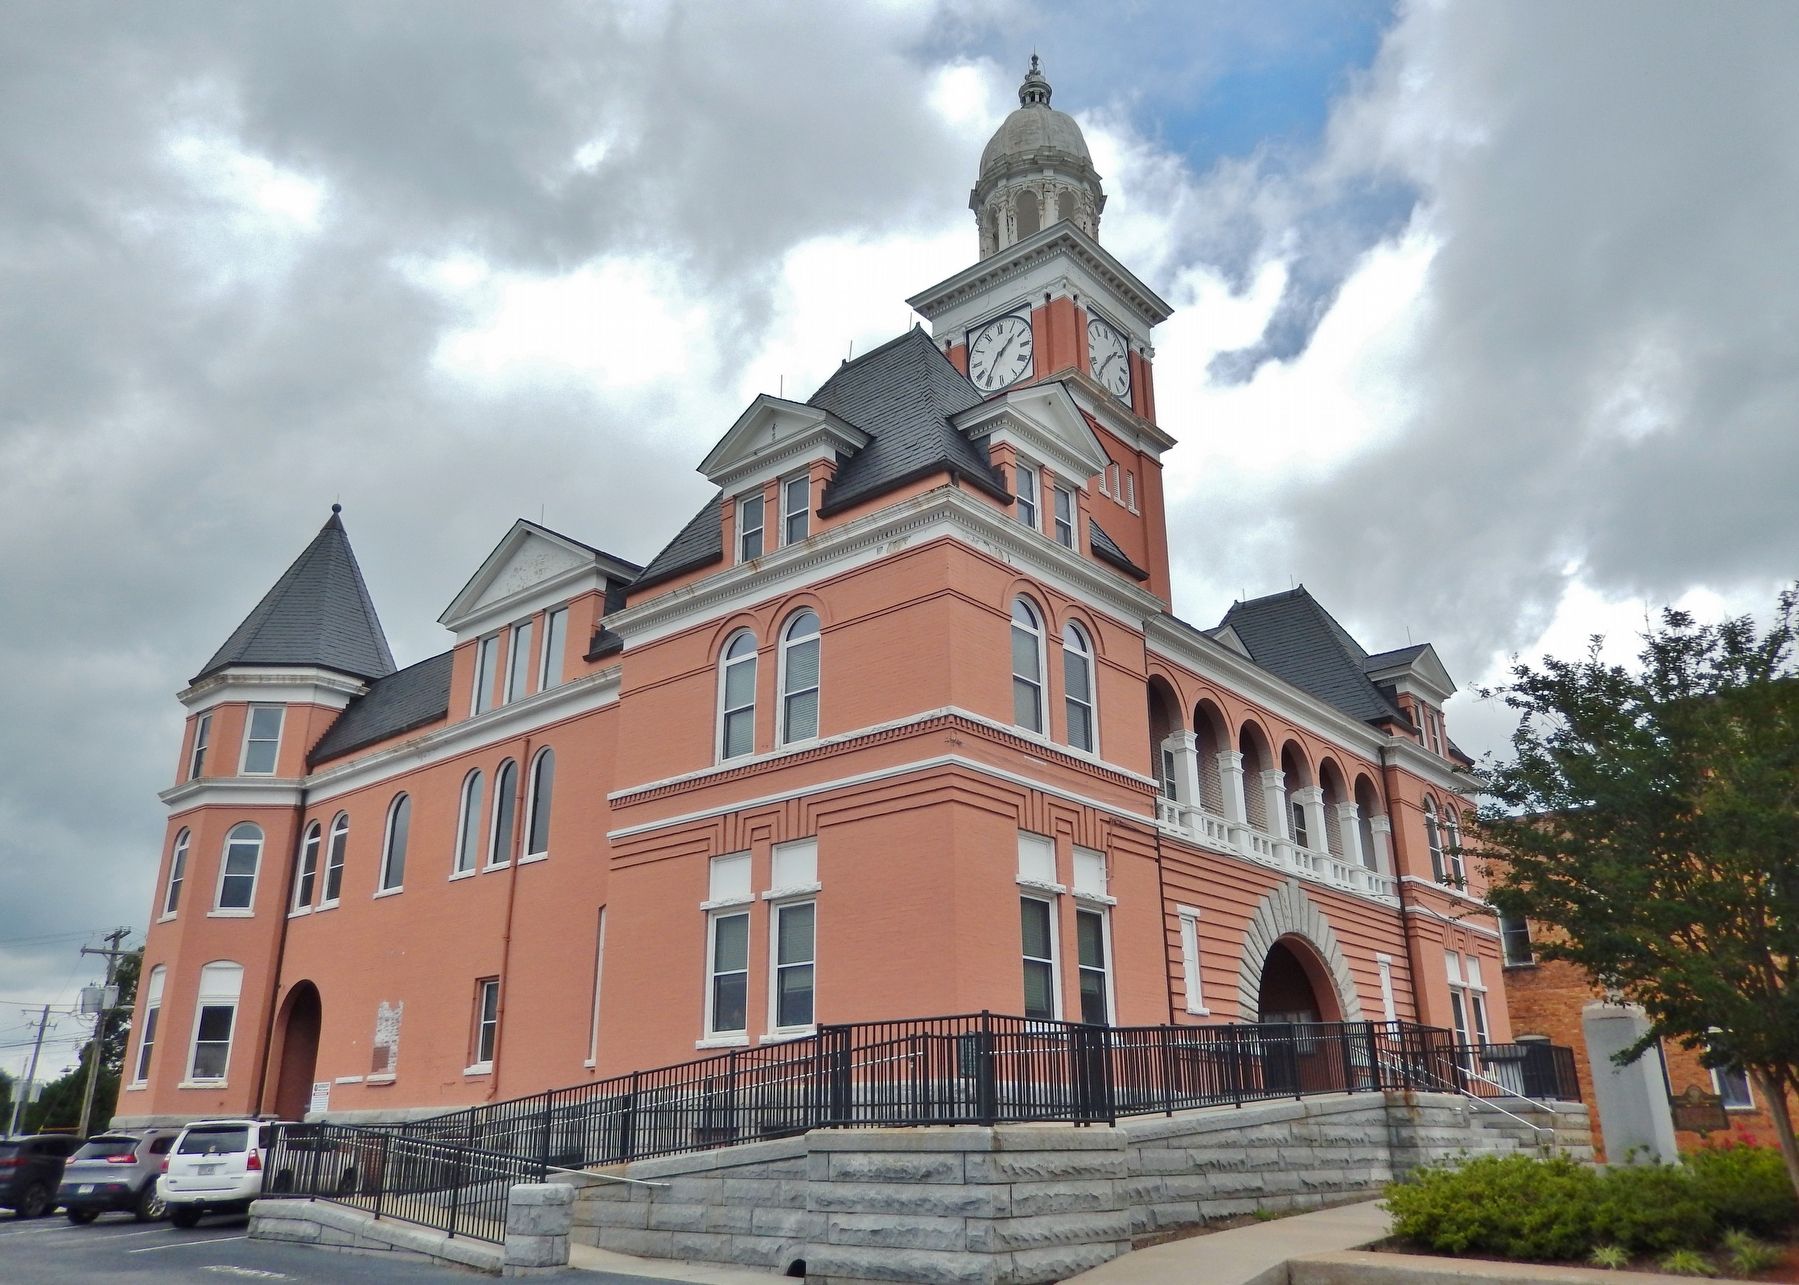 Elbert County Historic Courthouse (<i>southeast elevation</i>) image. Click for full size.